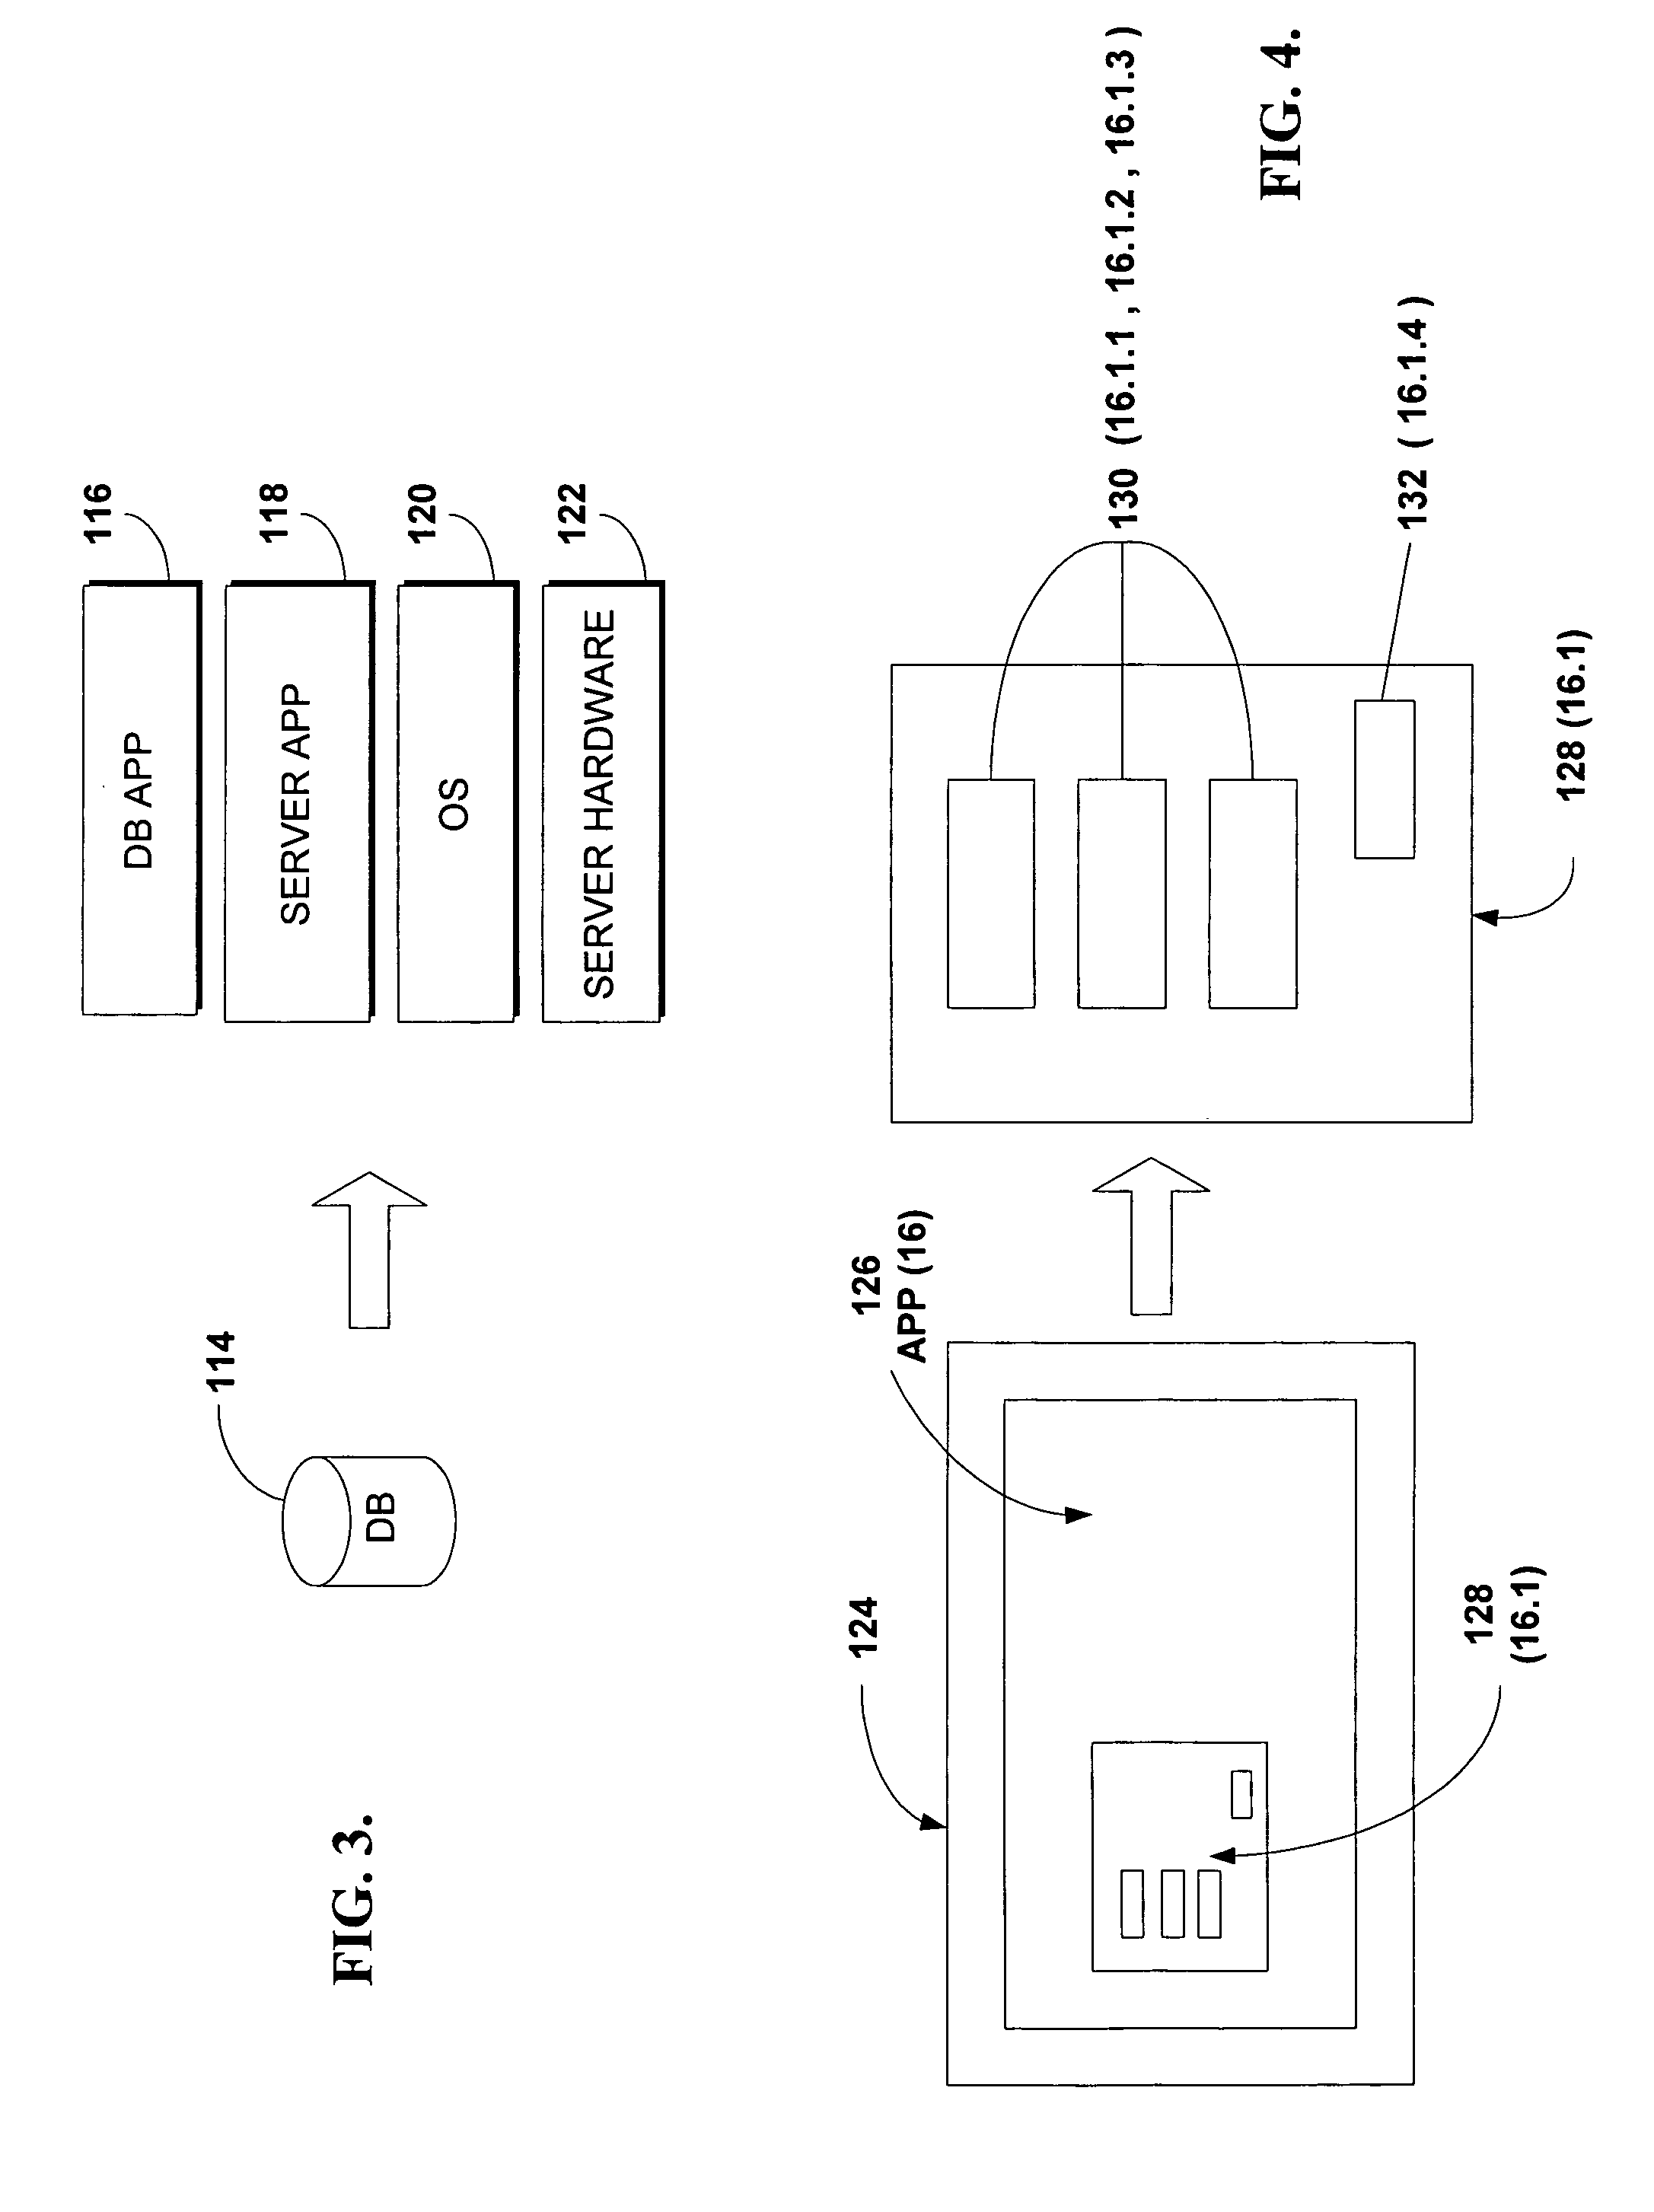 Method and structure for assigning a transaction cost